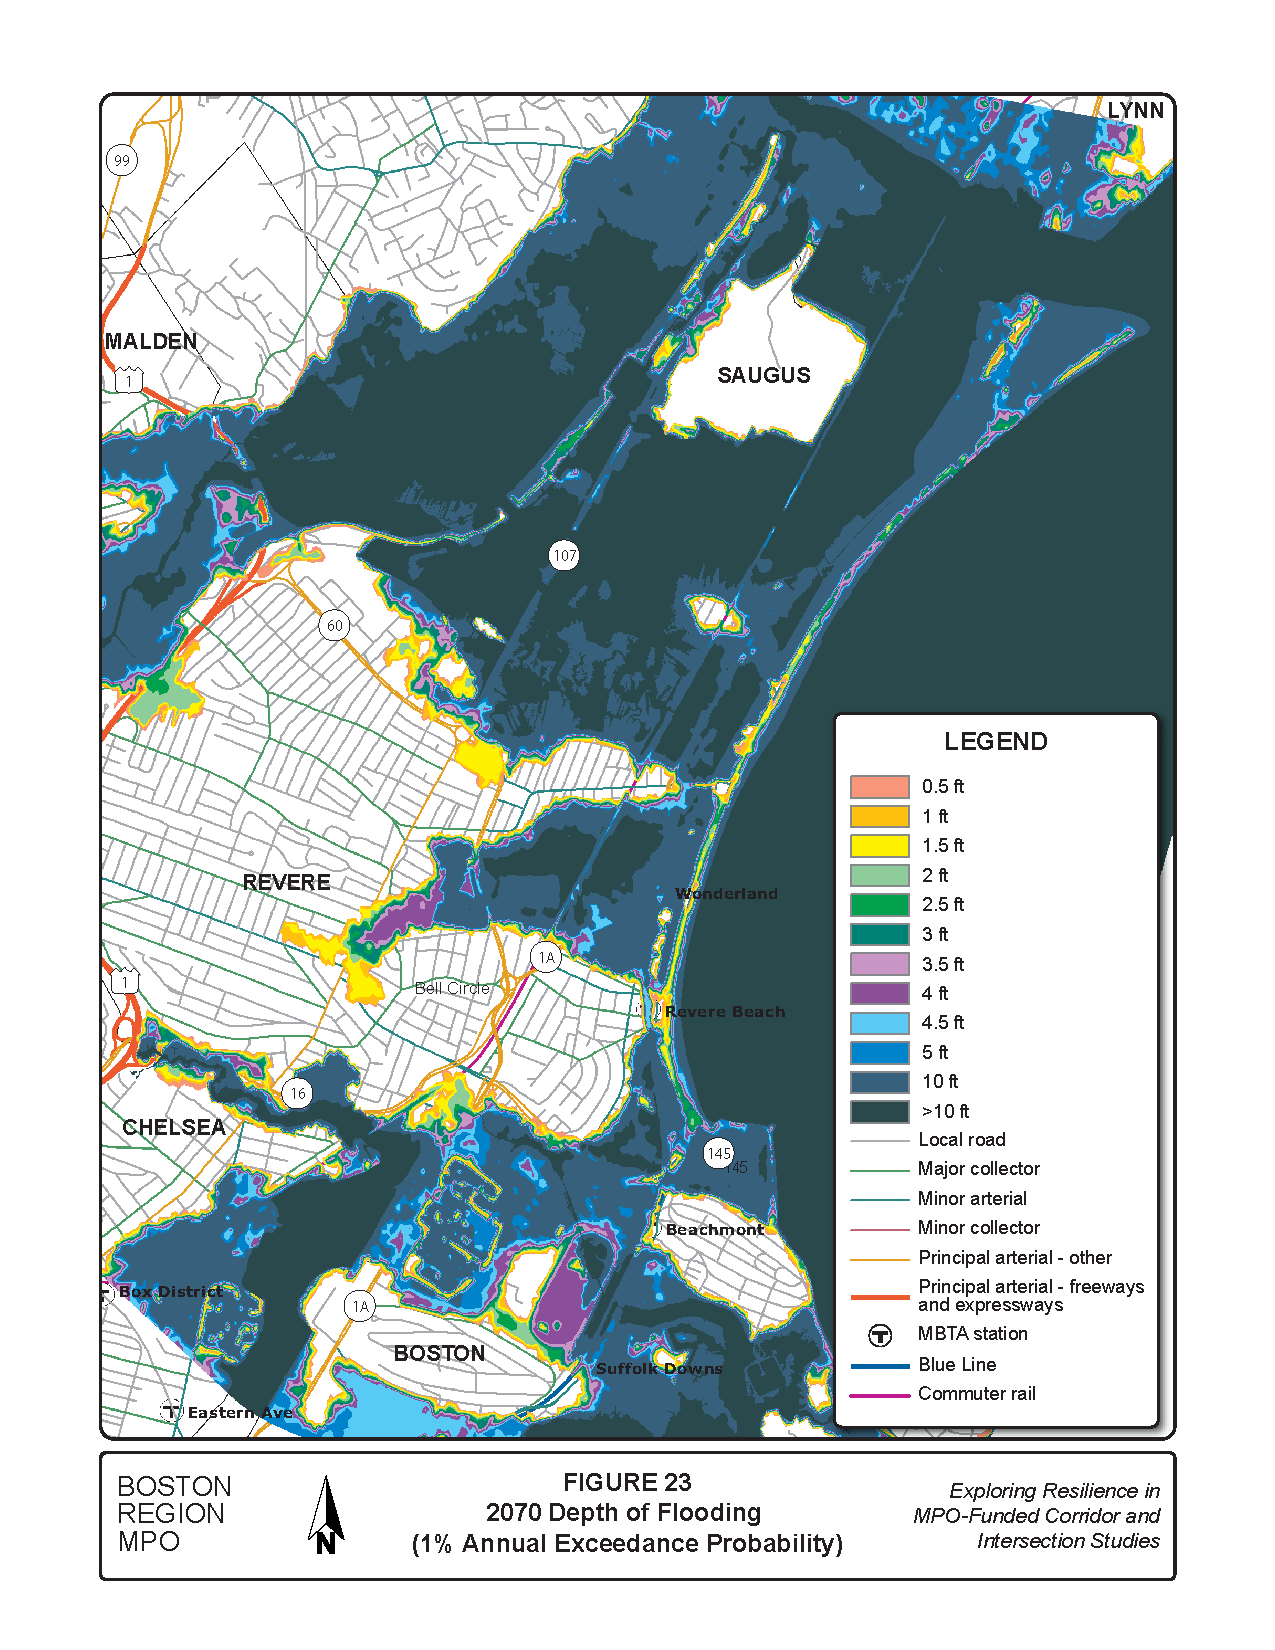 Figure 23 is a map of the study area showing the one percent flood depth for 2070.